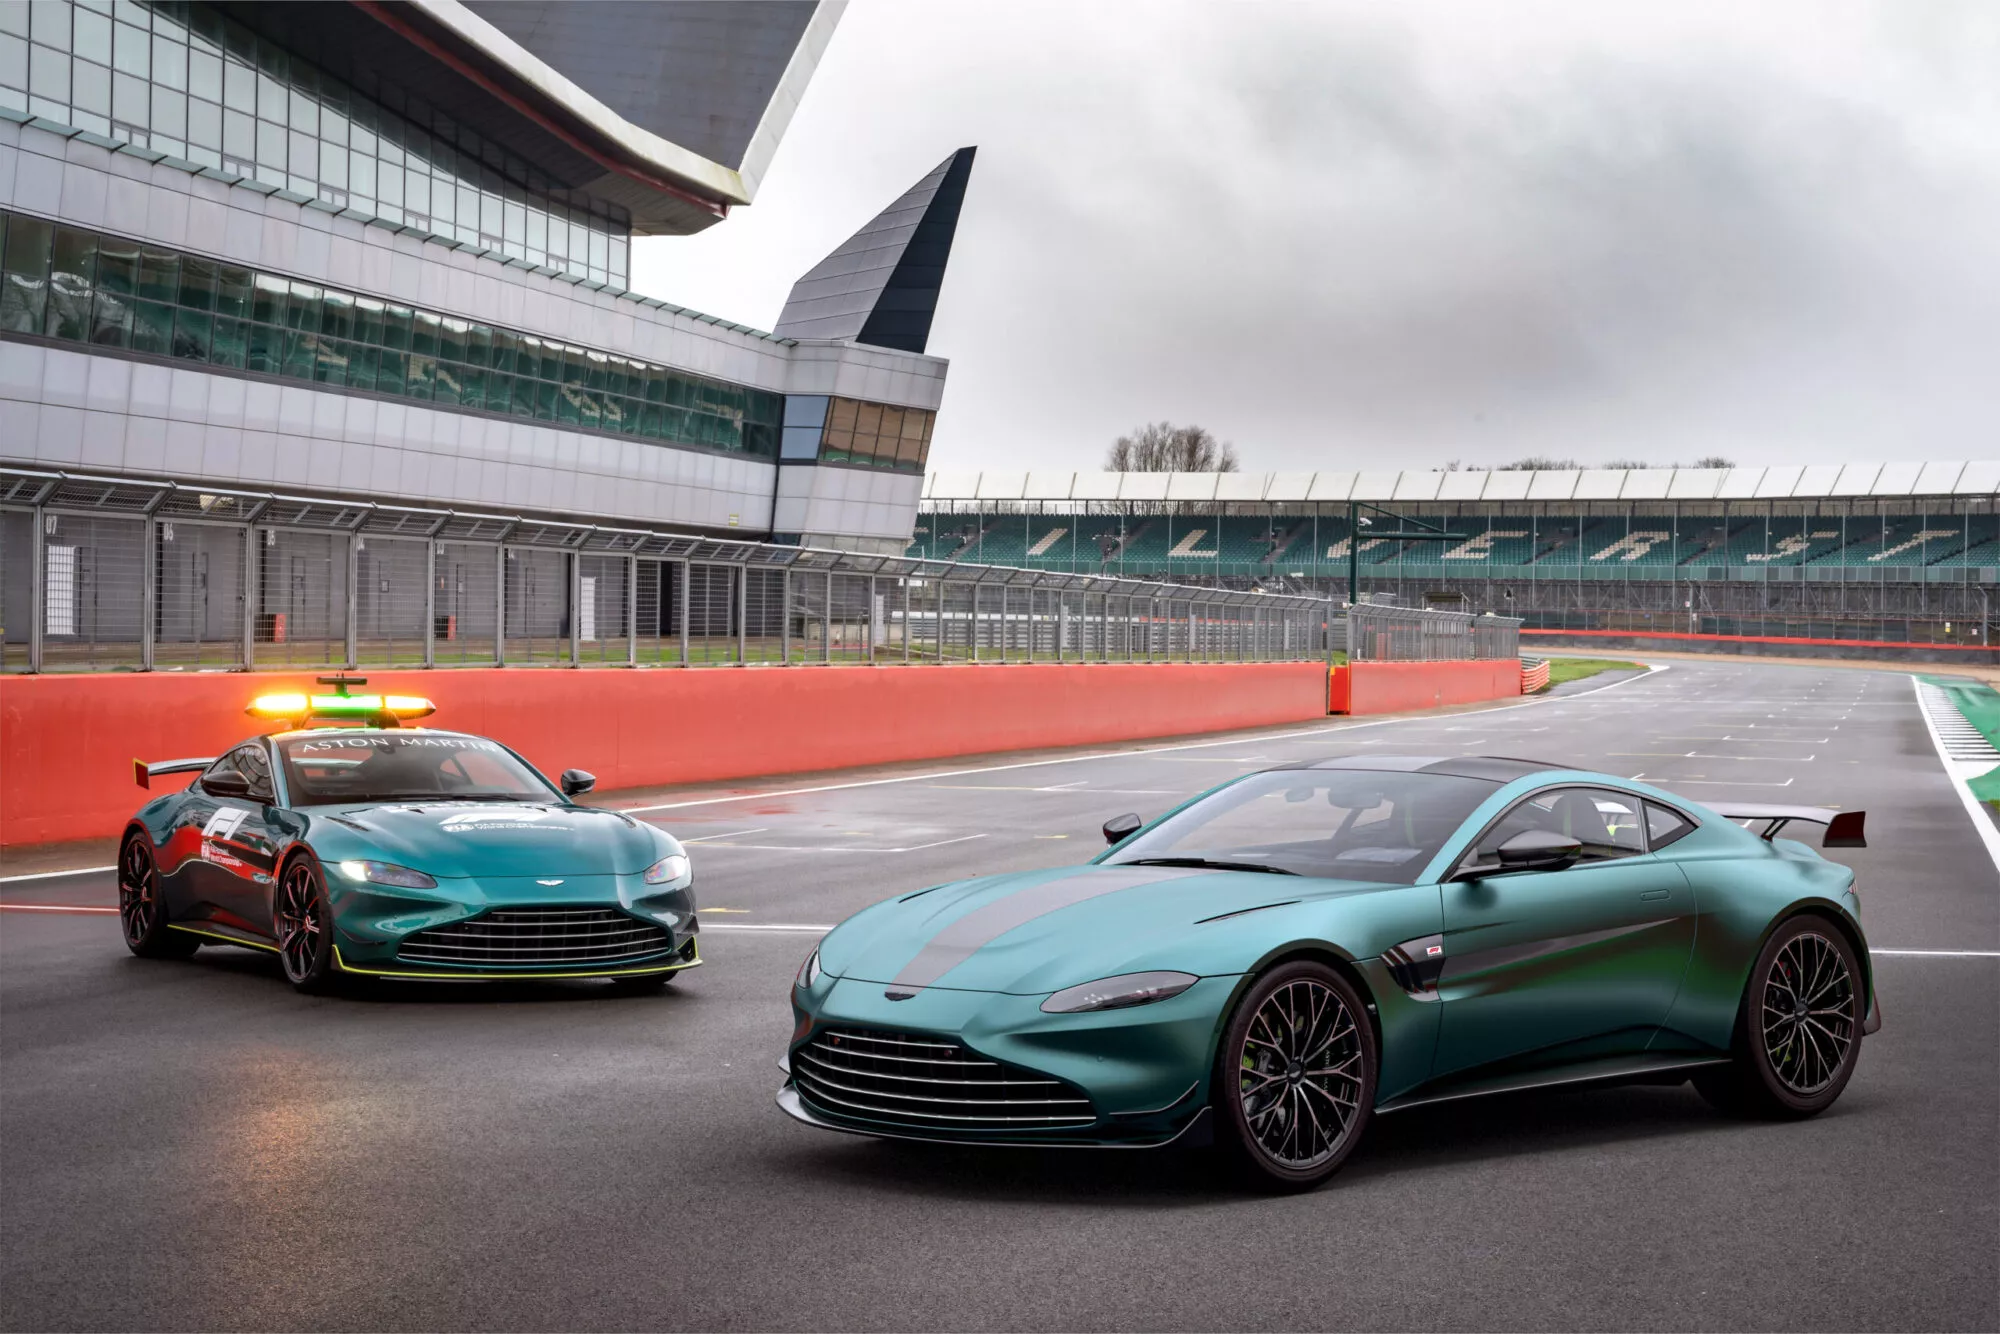 Aston Martin compromised on cooling with updated F1 launch car